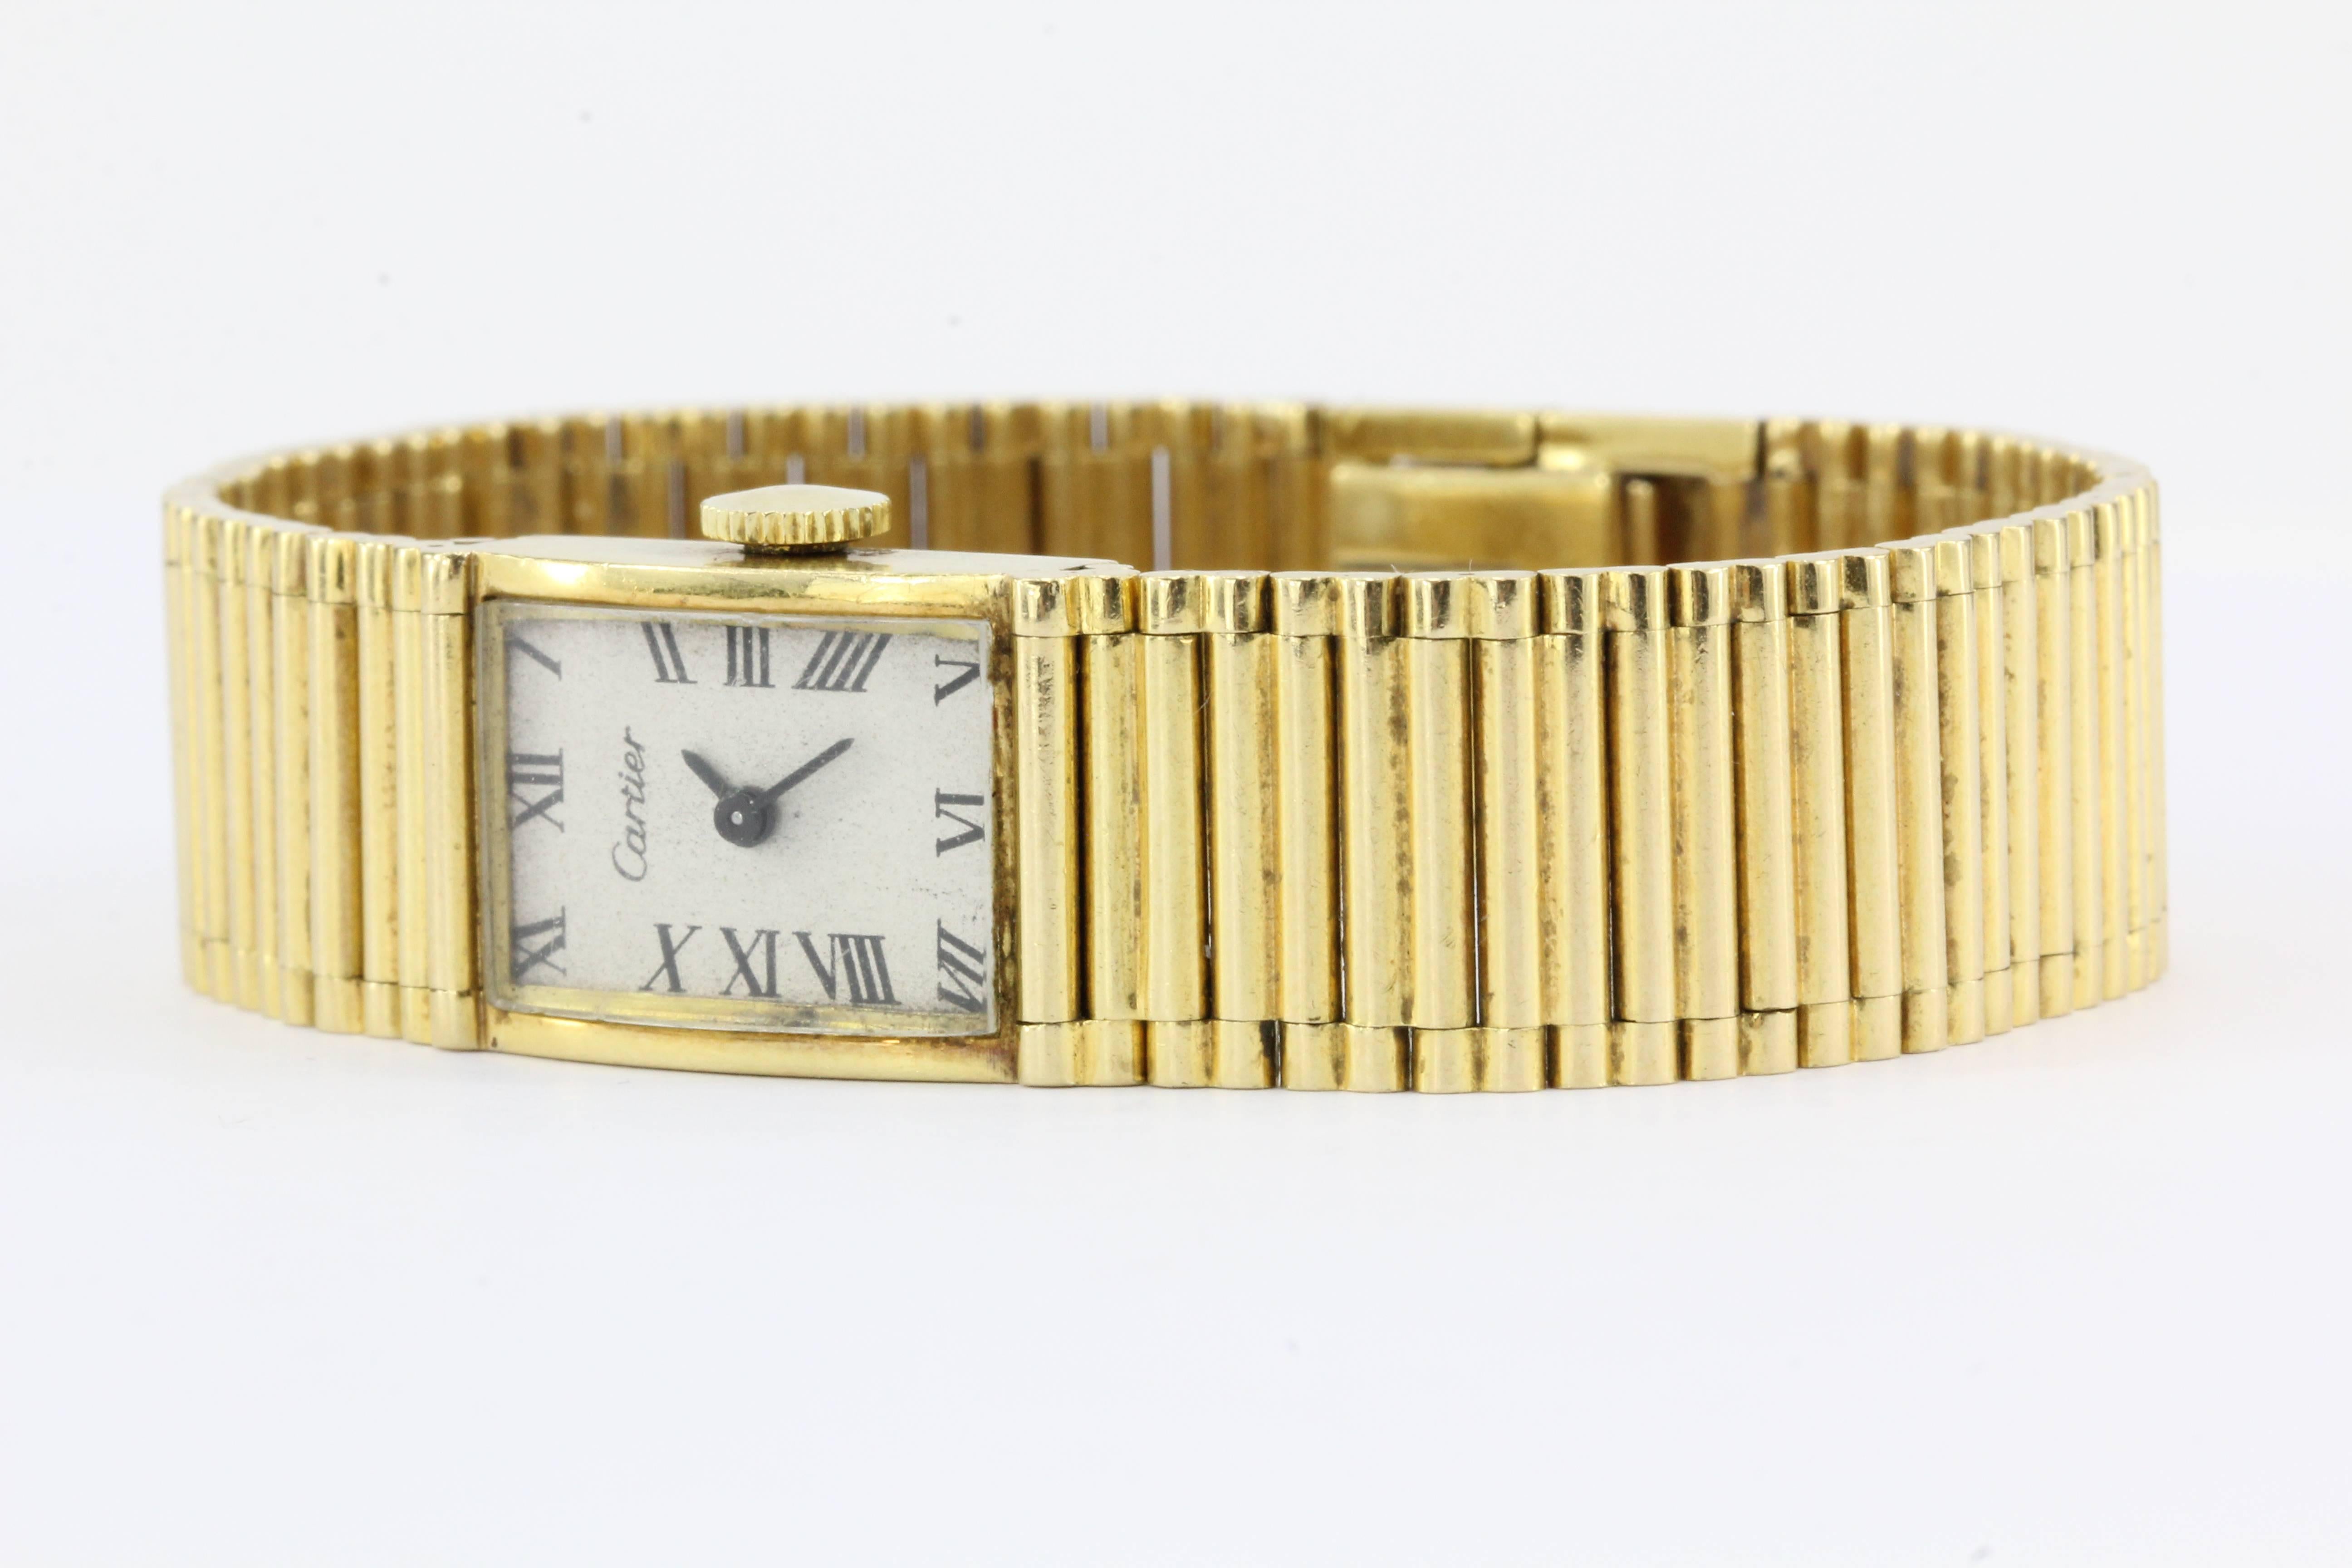 Vintage Cartier 18K Gold Girard Perregaux Tank Watch c.1950's

This Cartier Tank watch is a rare form set entirely in 18k yellow gold. The movement is a 17 jewel Girard Perregaux (a regular Cartier watch movement supplier) mechanical movement from